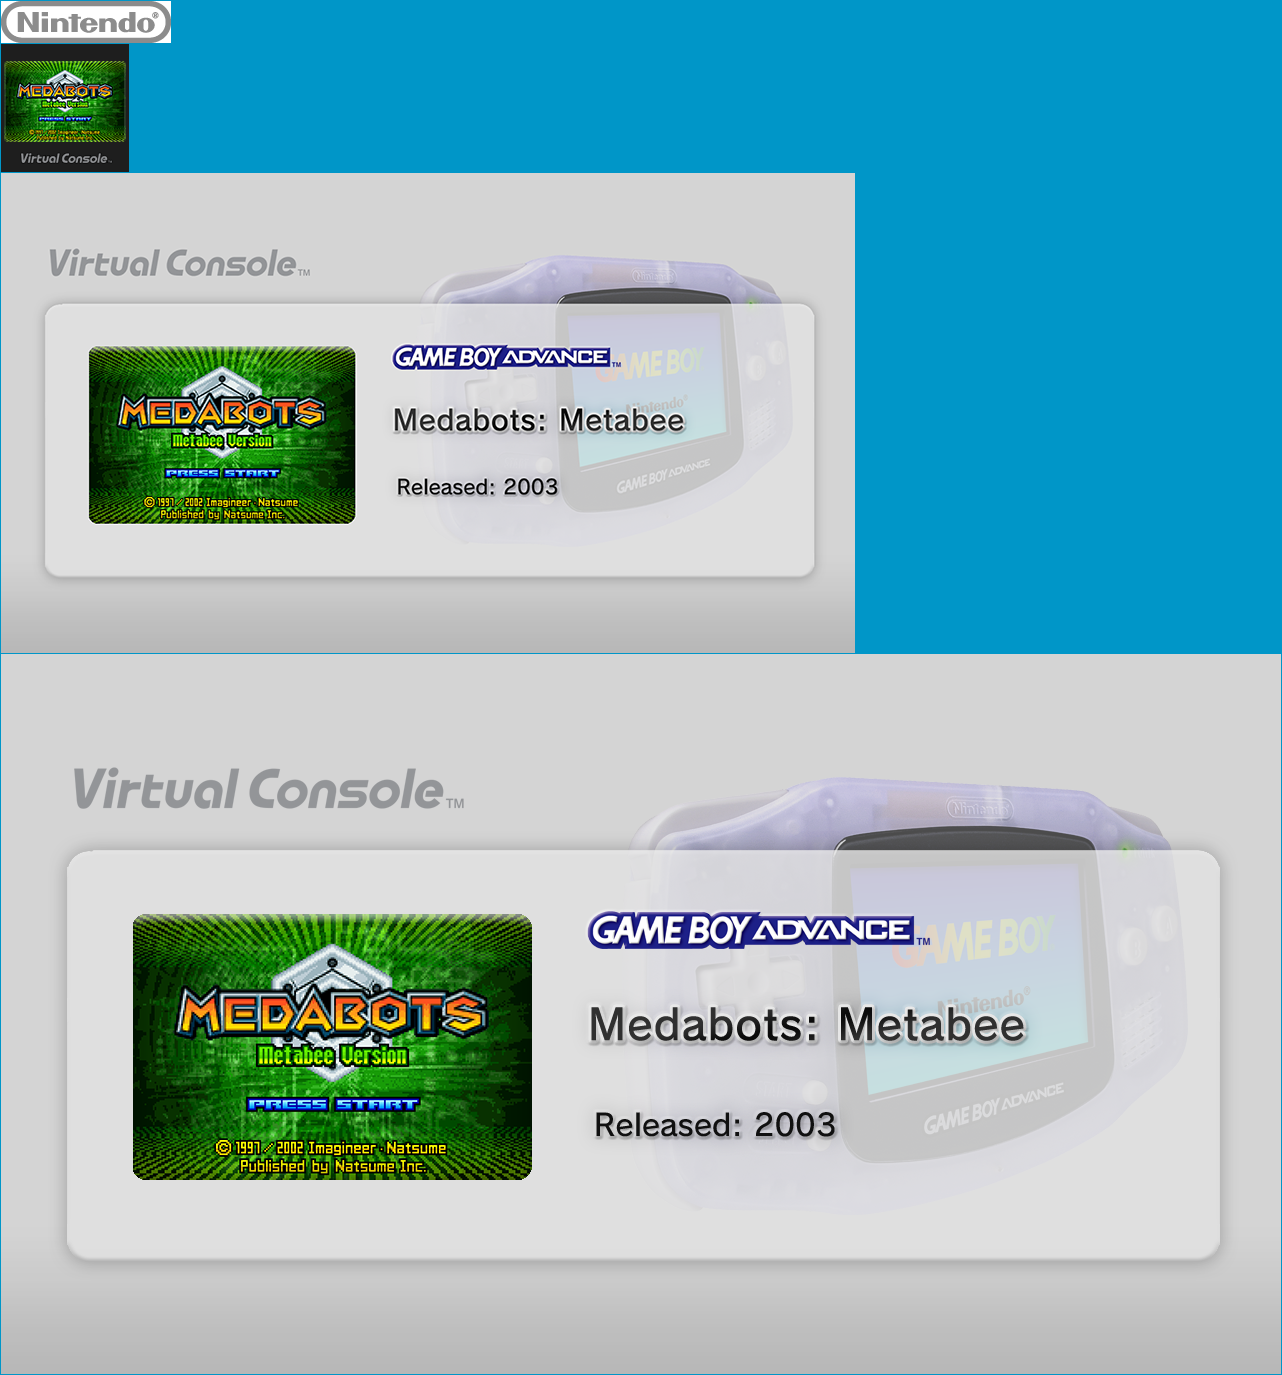 Virtual Console - Medabots: Metabee